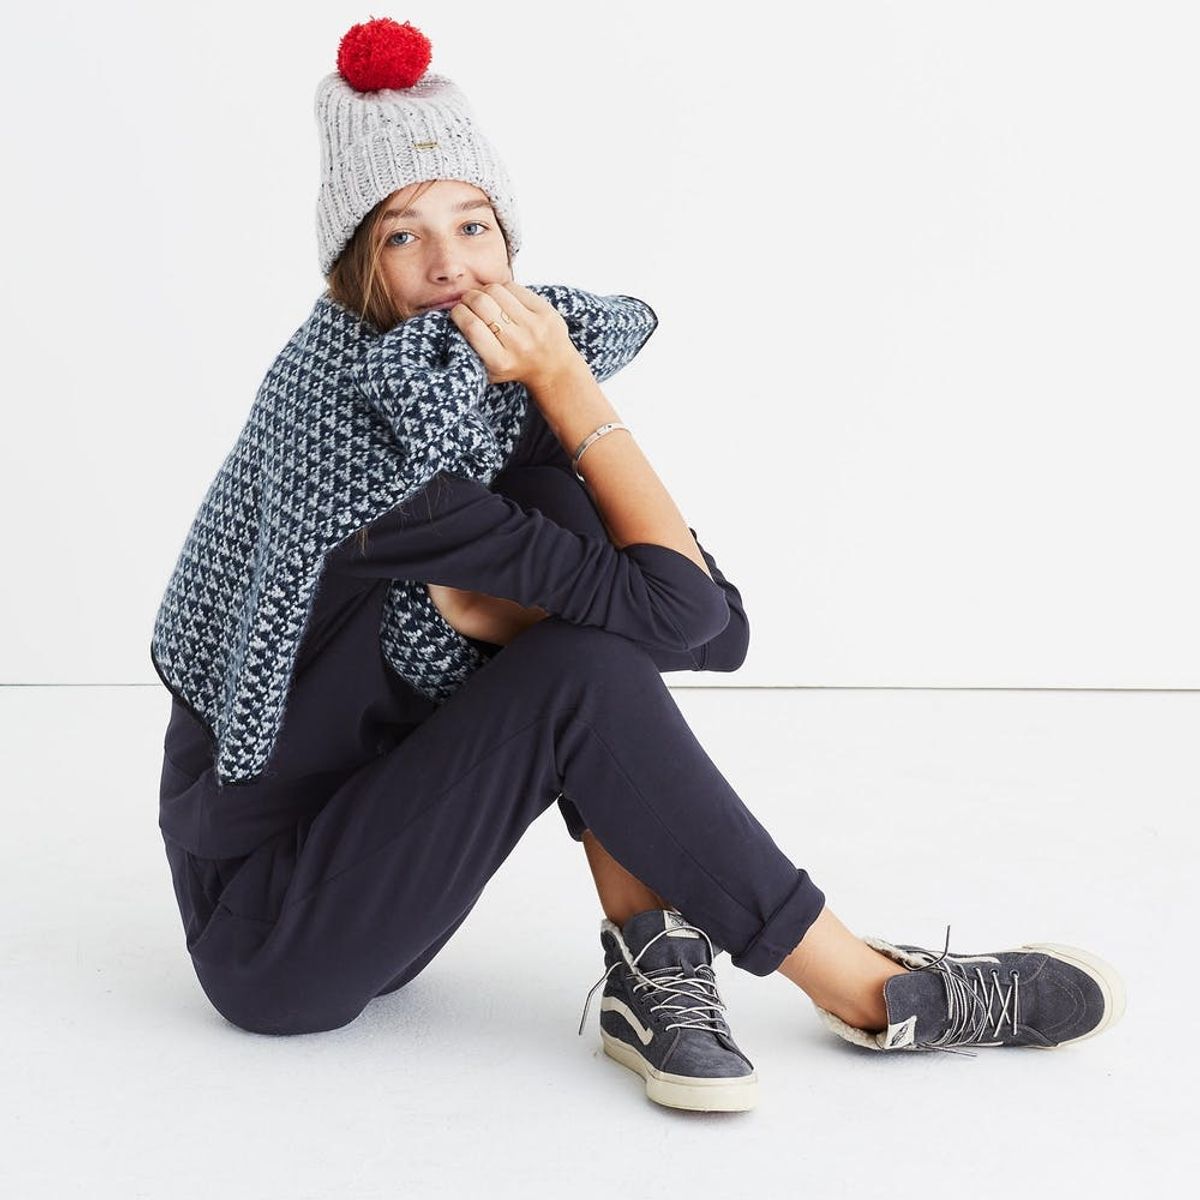 21 Style Essentials to Combat WTF Winter Weather